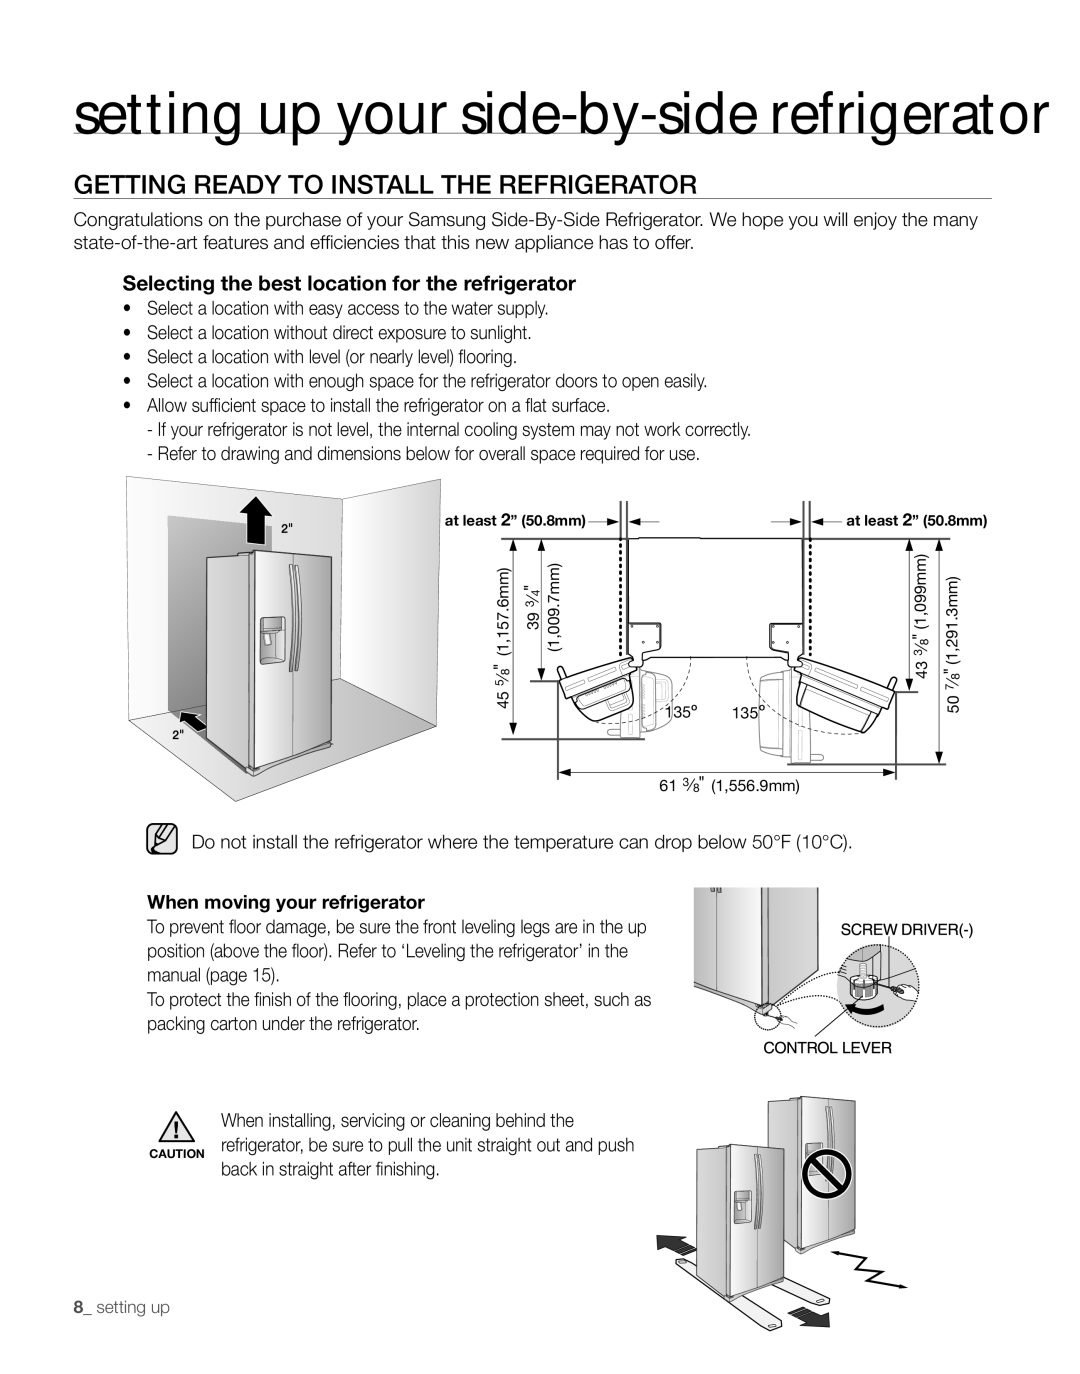 Samsung RS261MDRS, RS261MDBP setting up your side-by-side refrigerator, Getting ready to install the refrigerator 